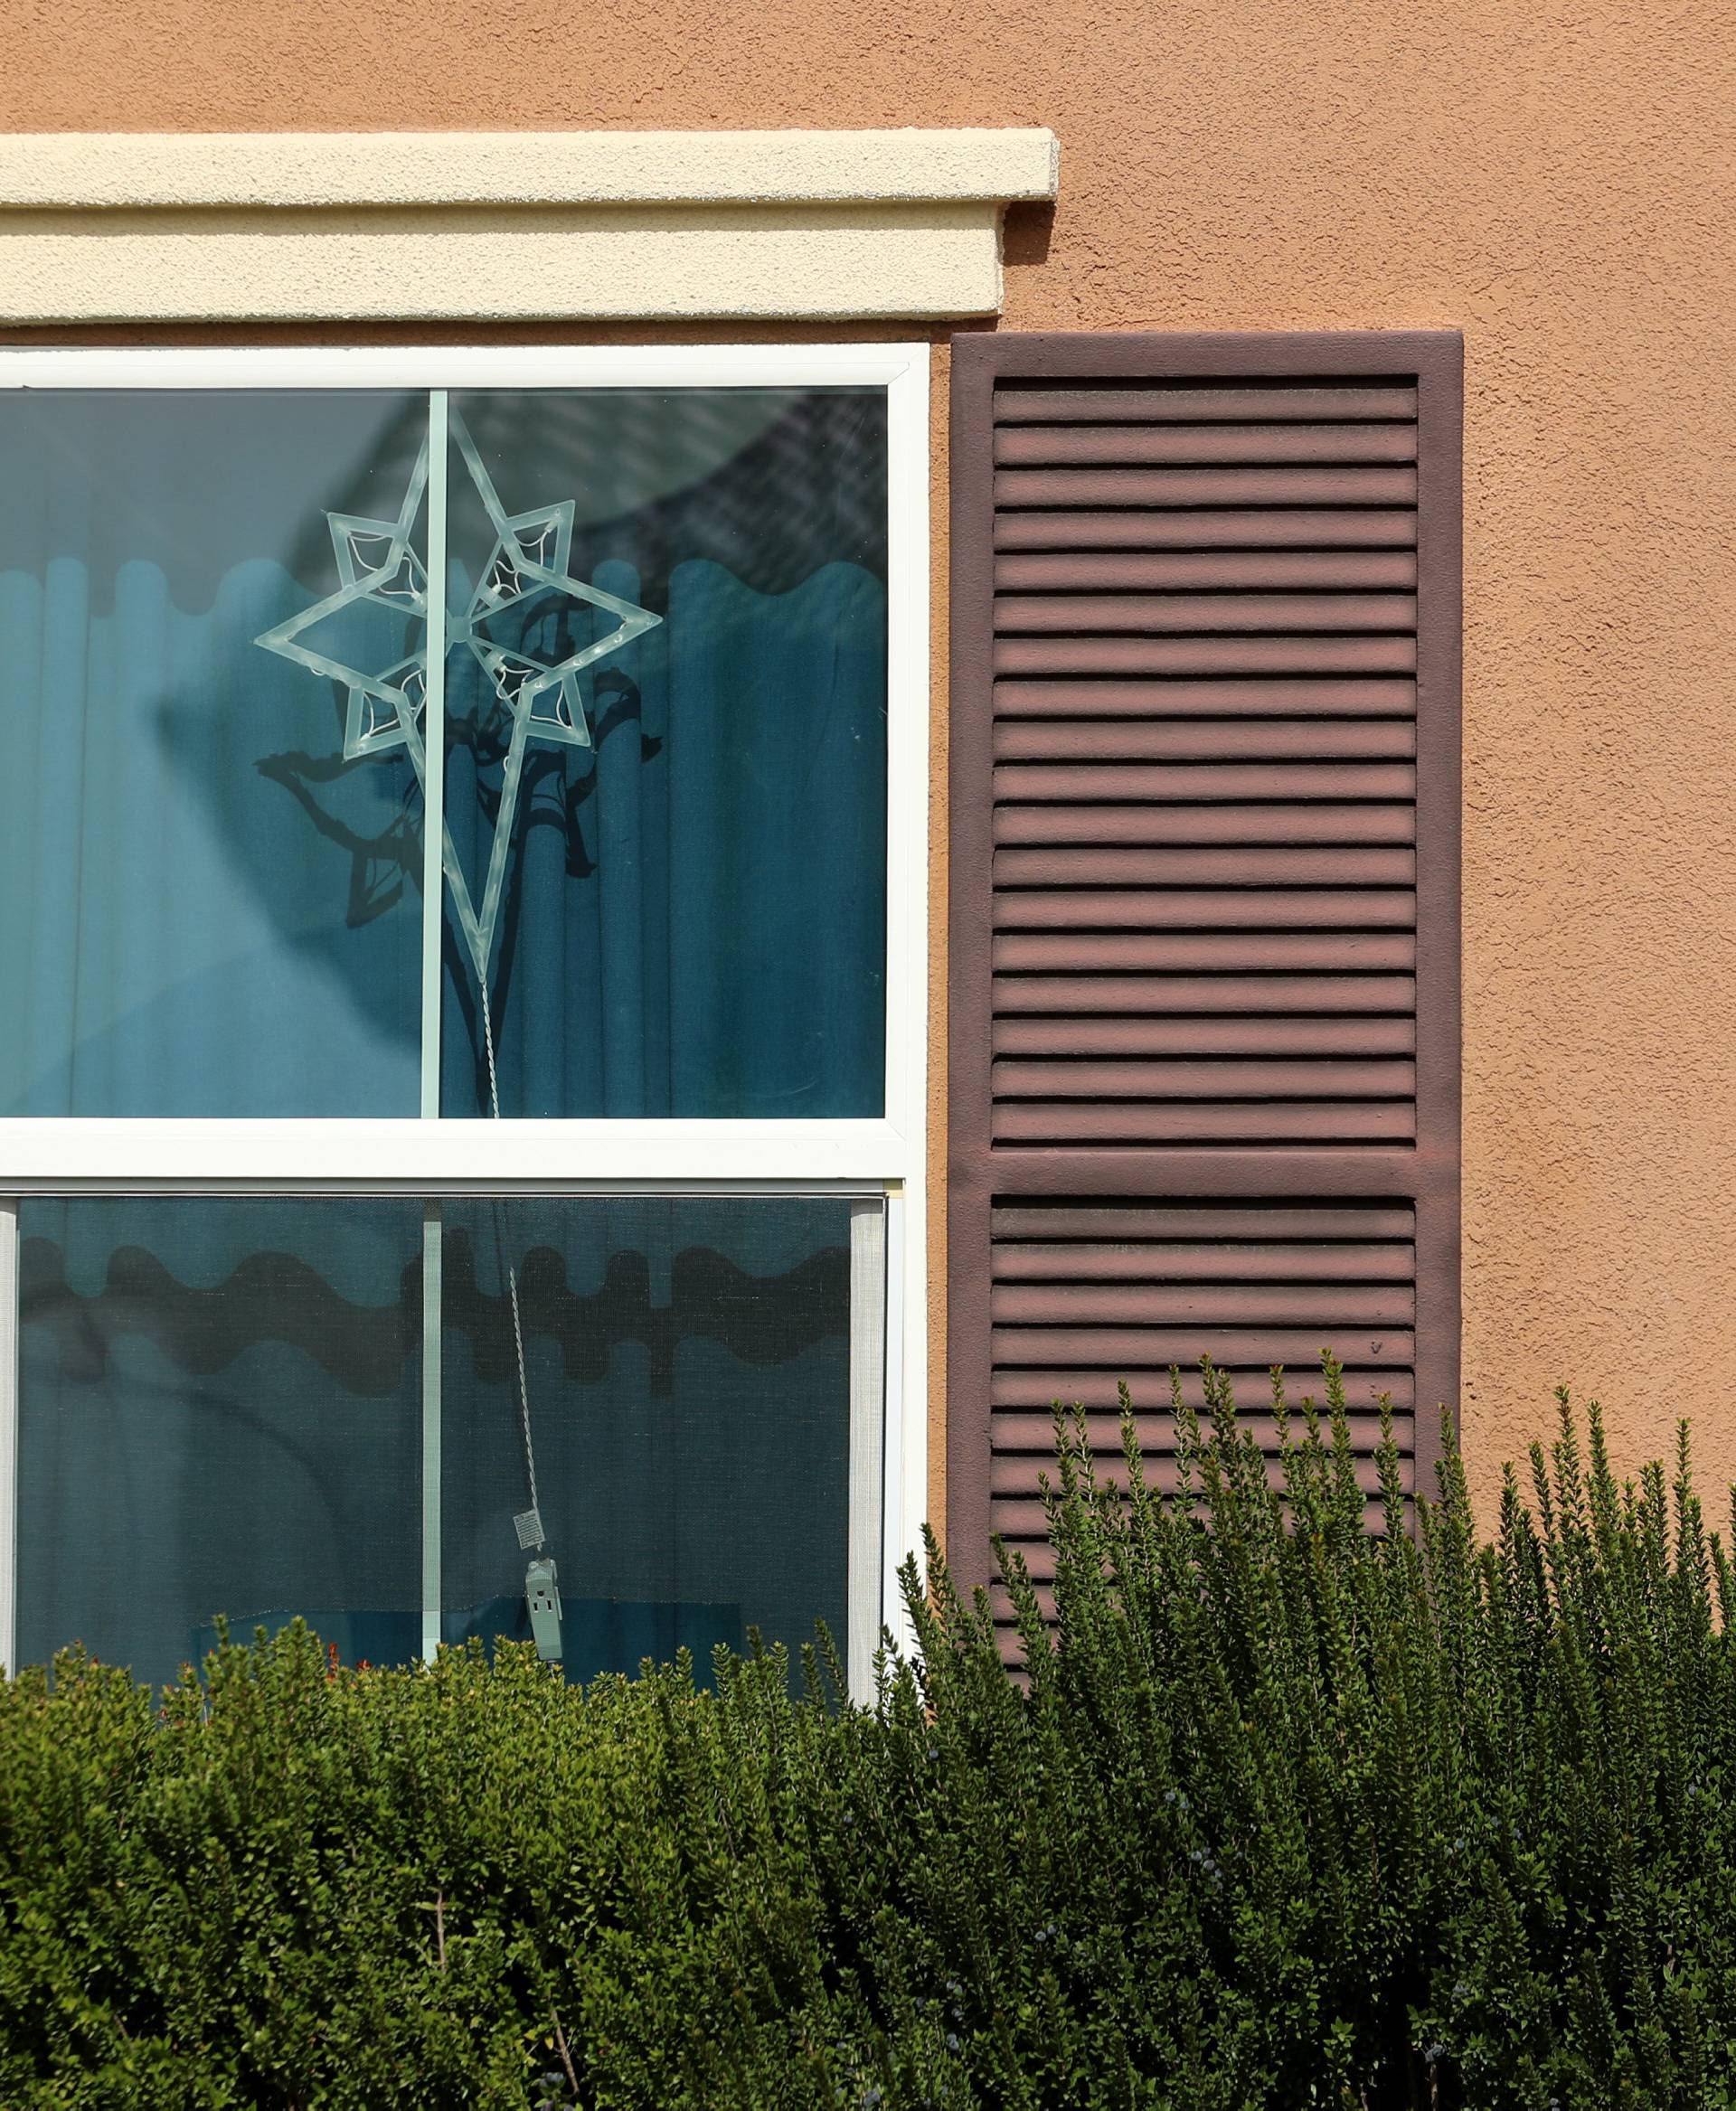 A decoration hangs in the window of the home of David Allen and Louise Anna Turpin in Perris